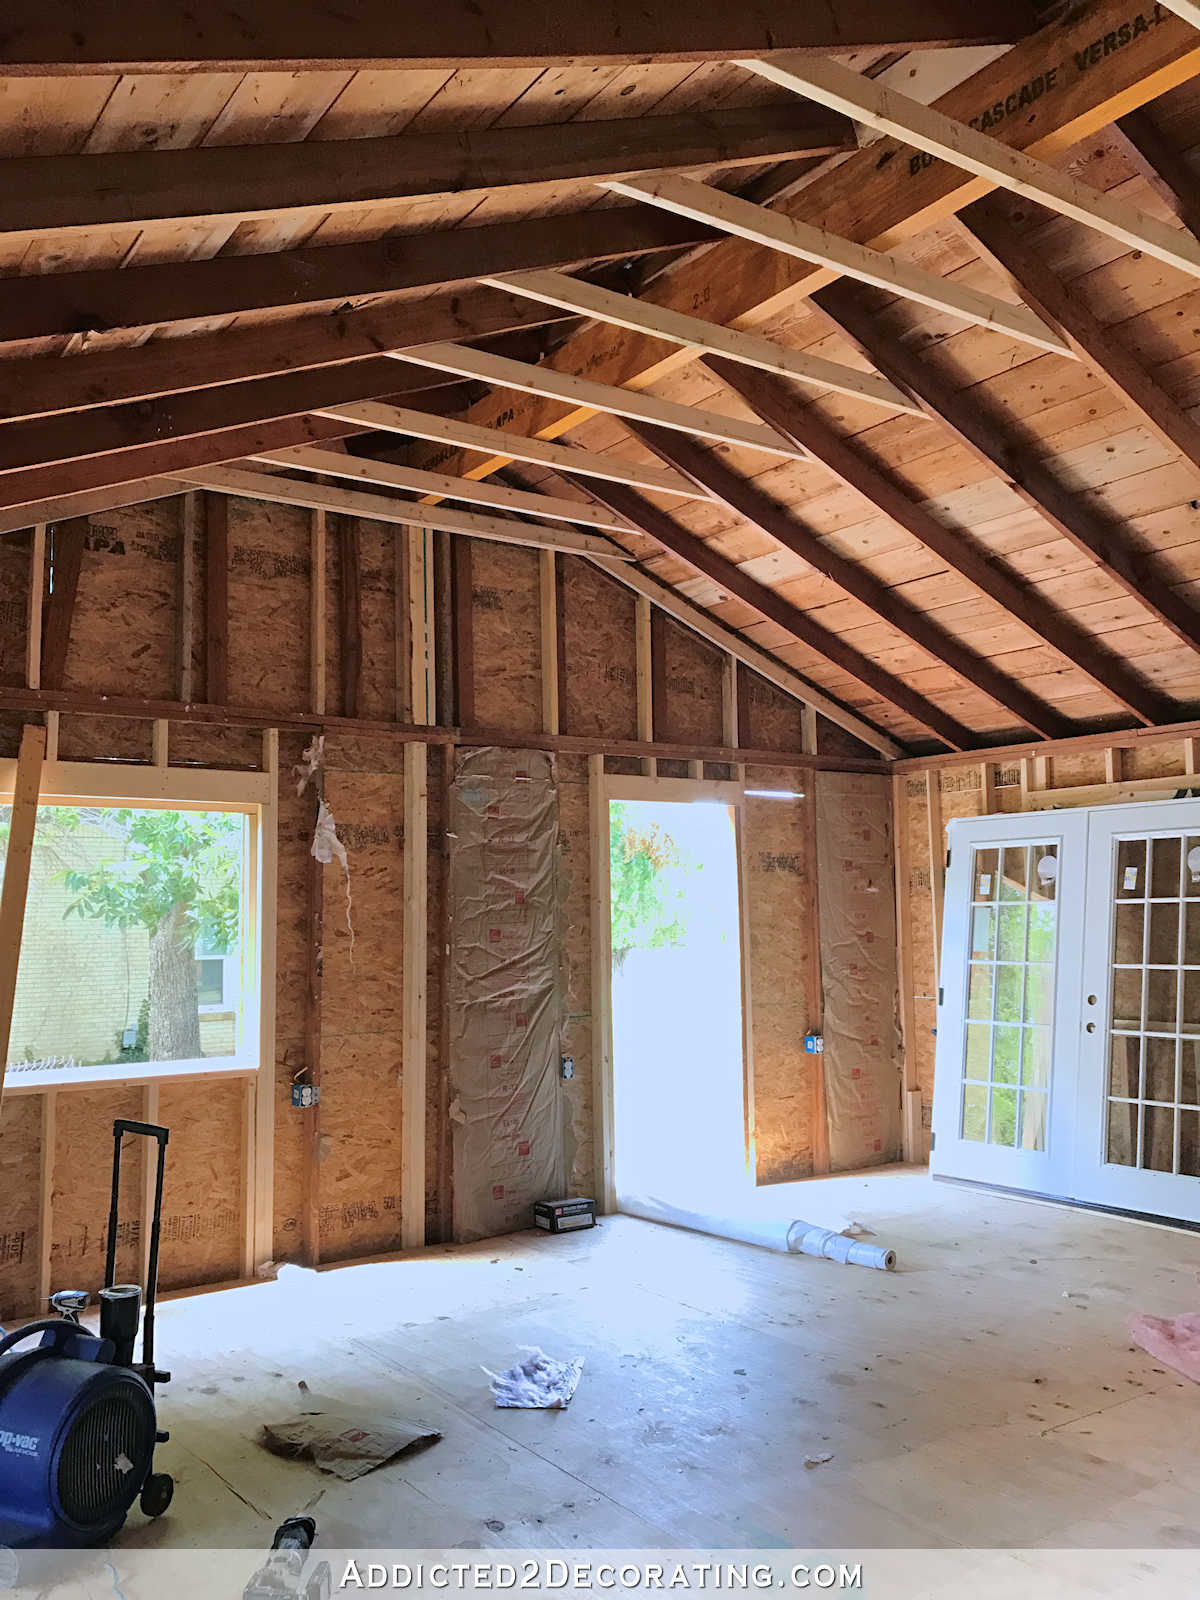 Studio Vaulted Ceiling, Ridge Line, and Decisions Made